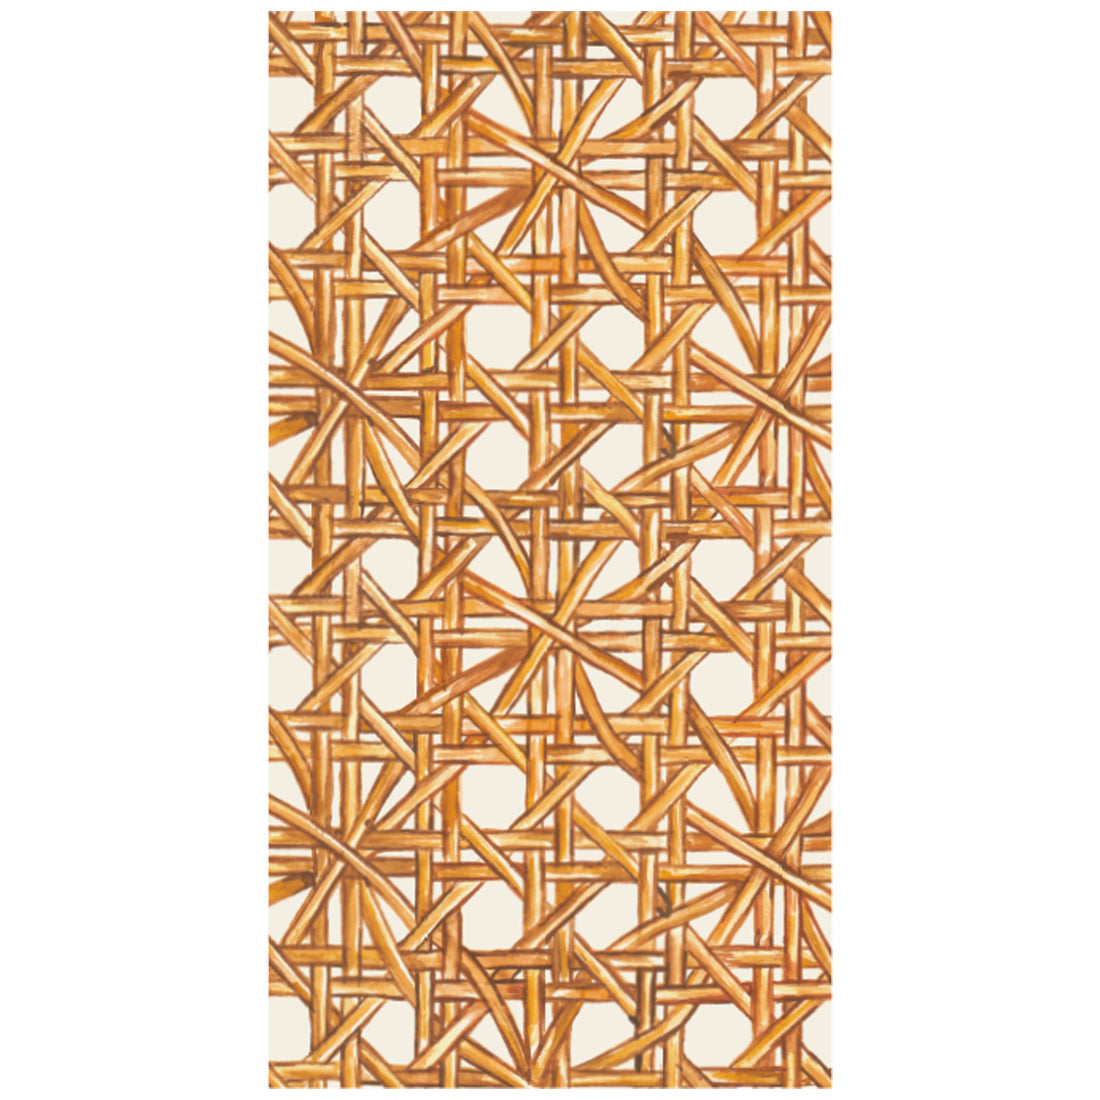 A rectangle guest napkin featuring an illustrated pattern of tan rattan strands woven together intricately over a white background.